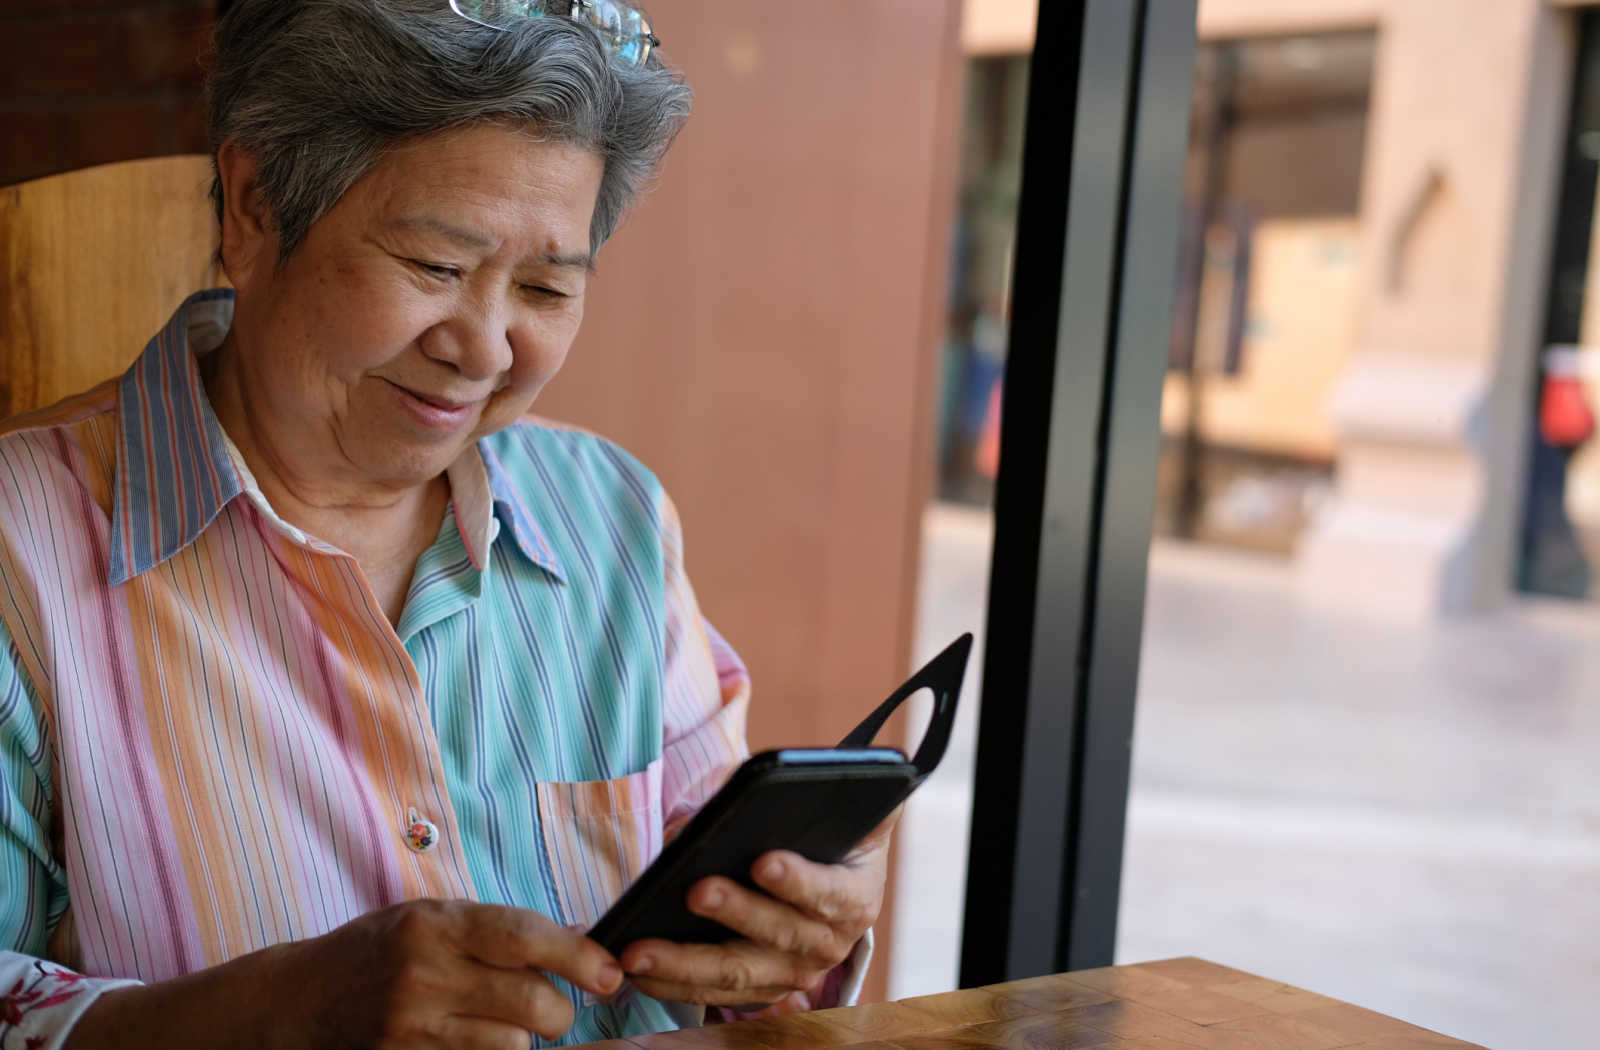 A senior woman holding a smartphone and looking at the screen.